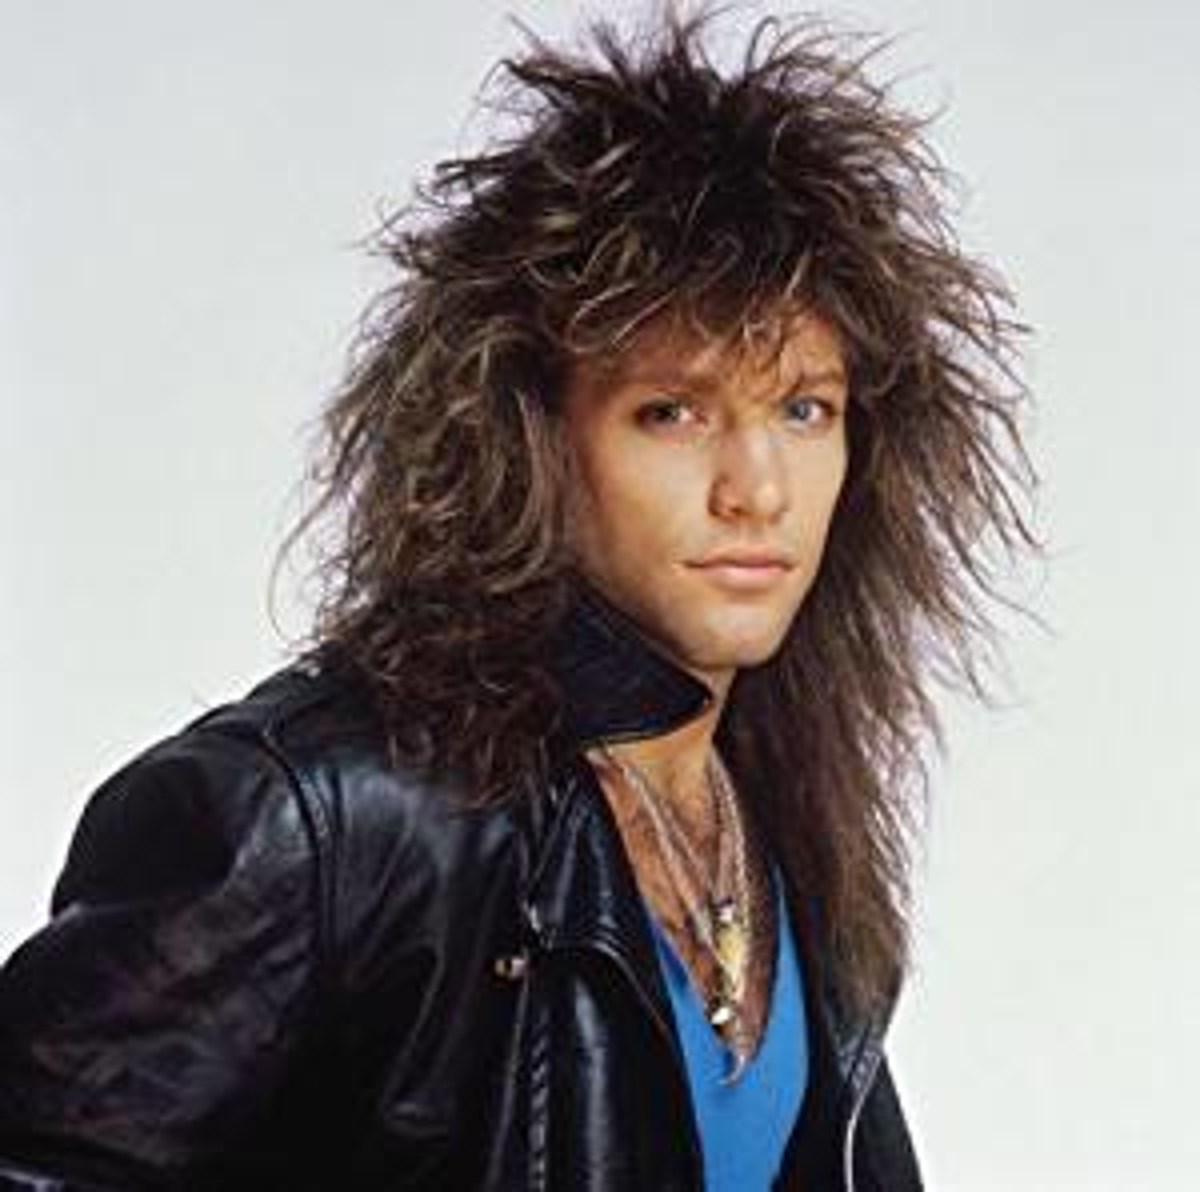 Show Us Your ‘Bon Jovi Big Hair’ to Win Concert Tickets and Sound Check Passes!